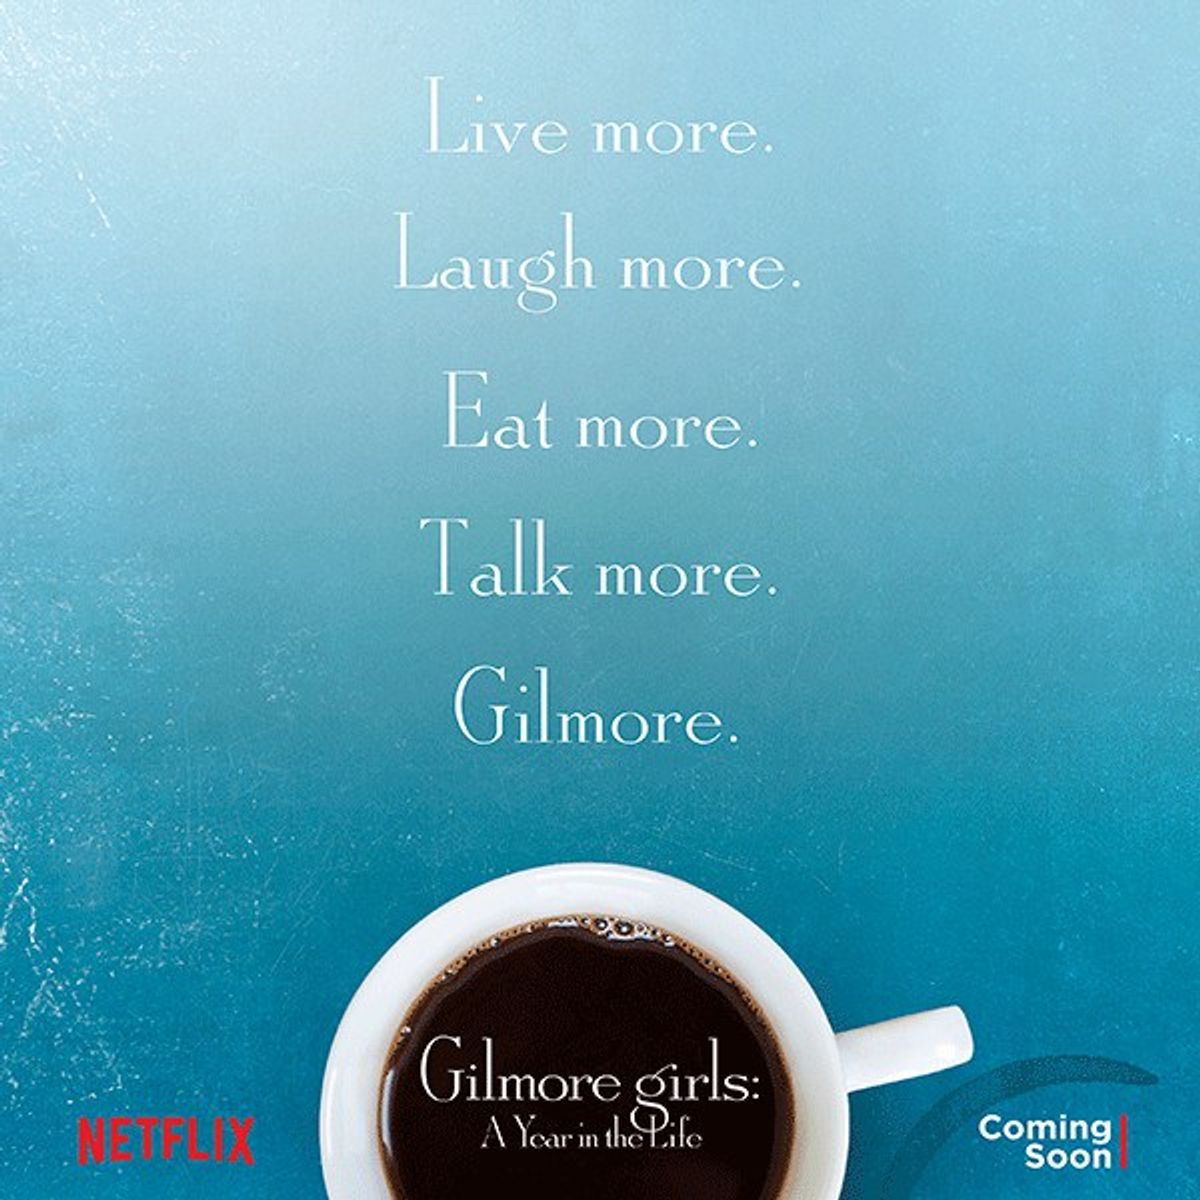 The Gilmore Girls Reunion Trailer Is Everything And More